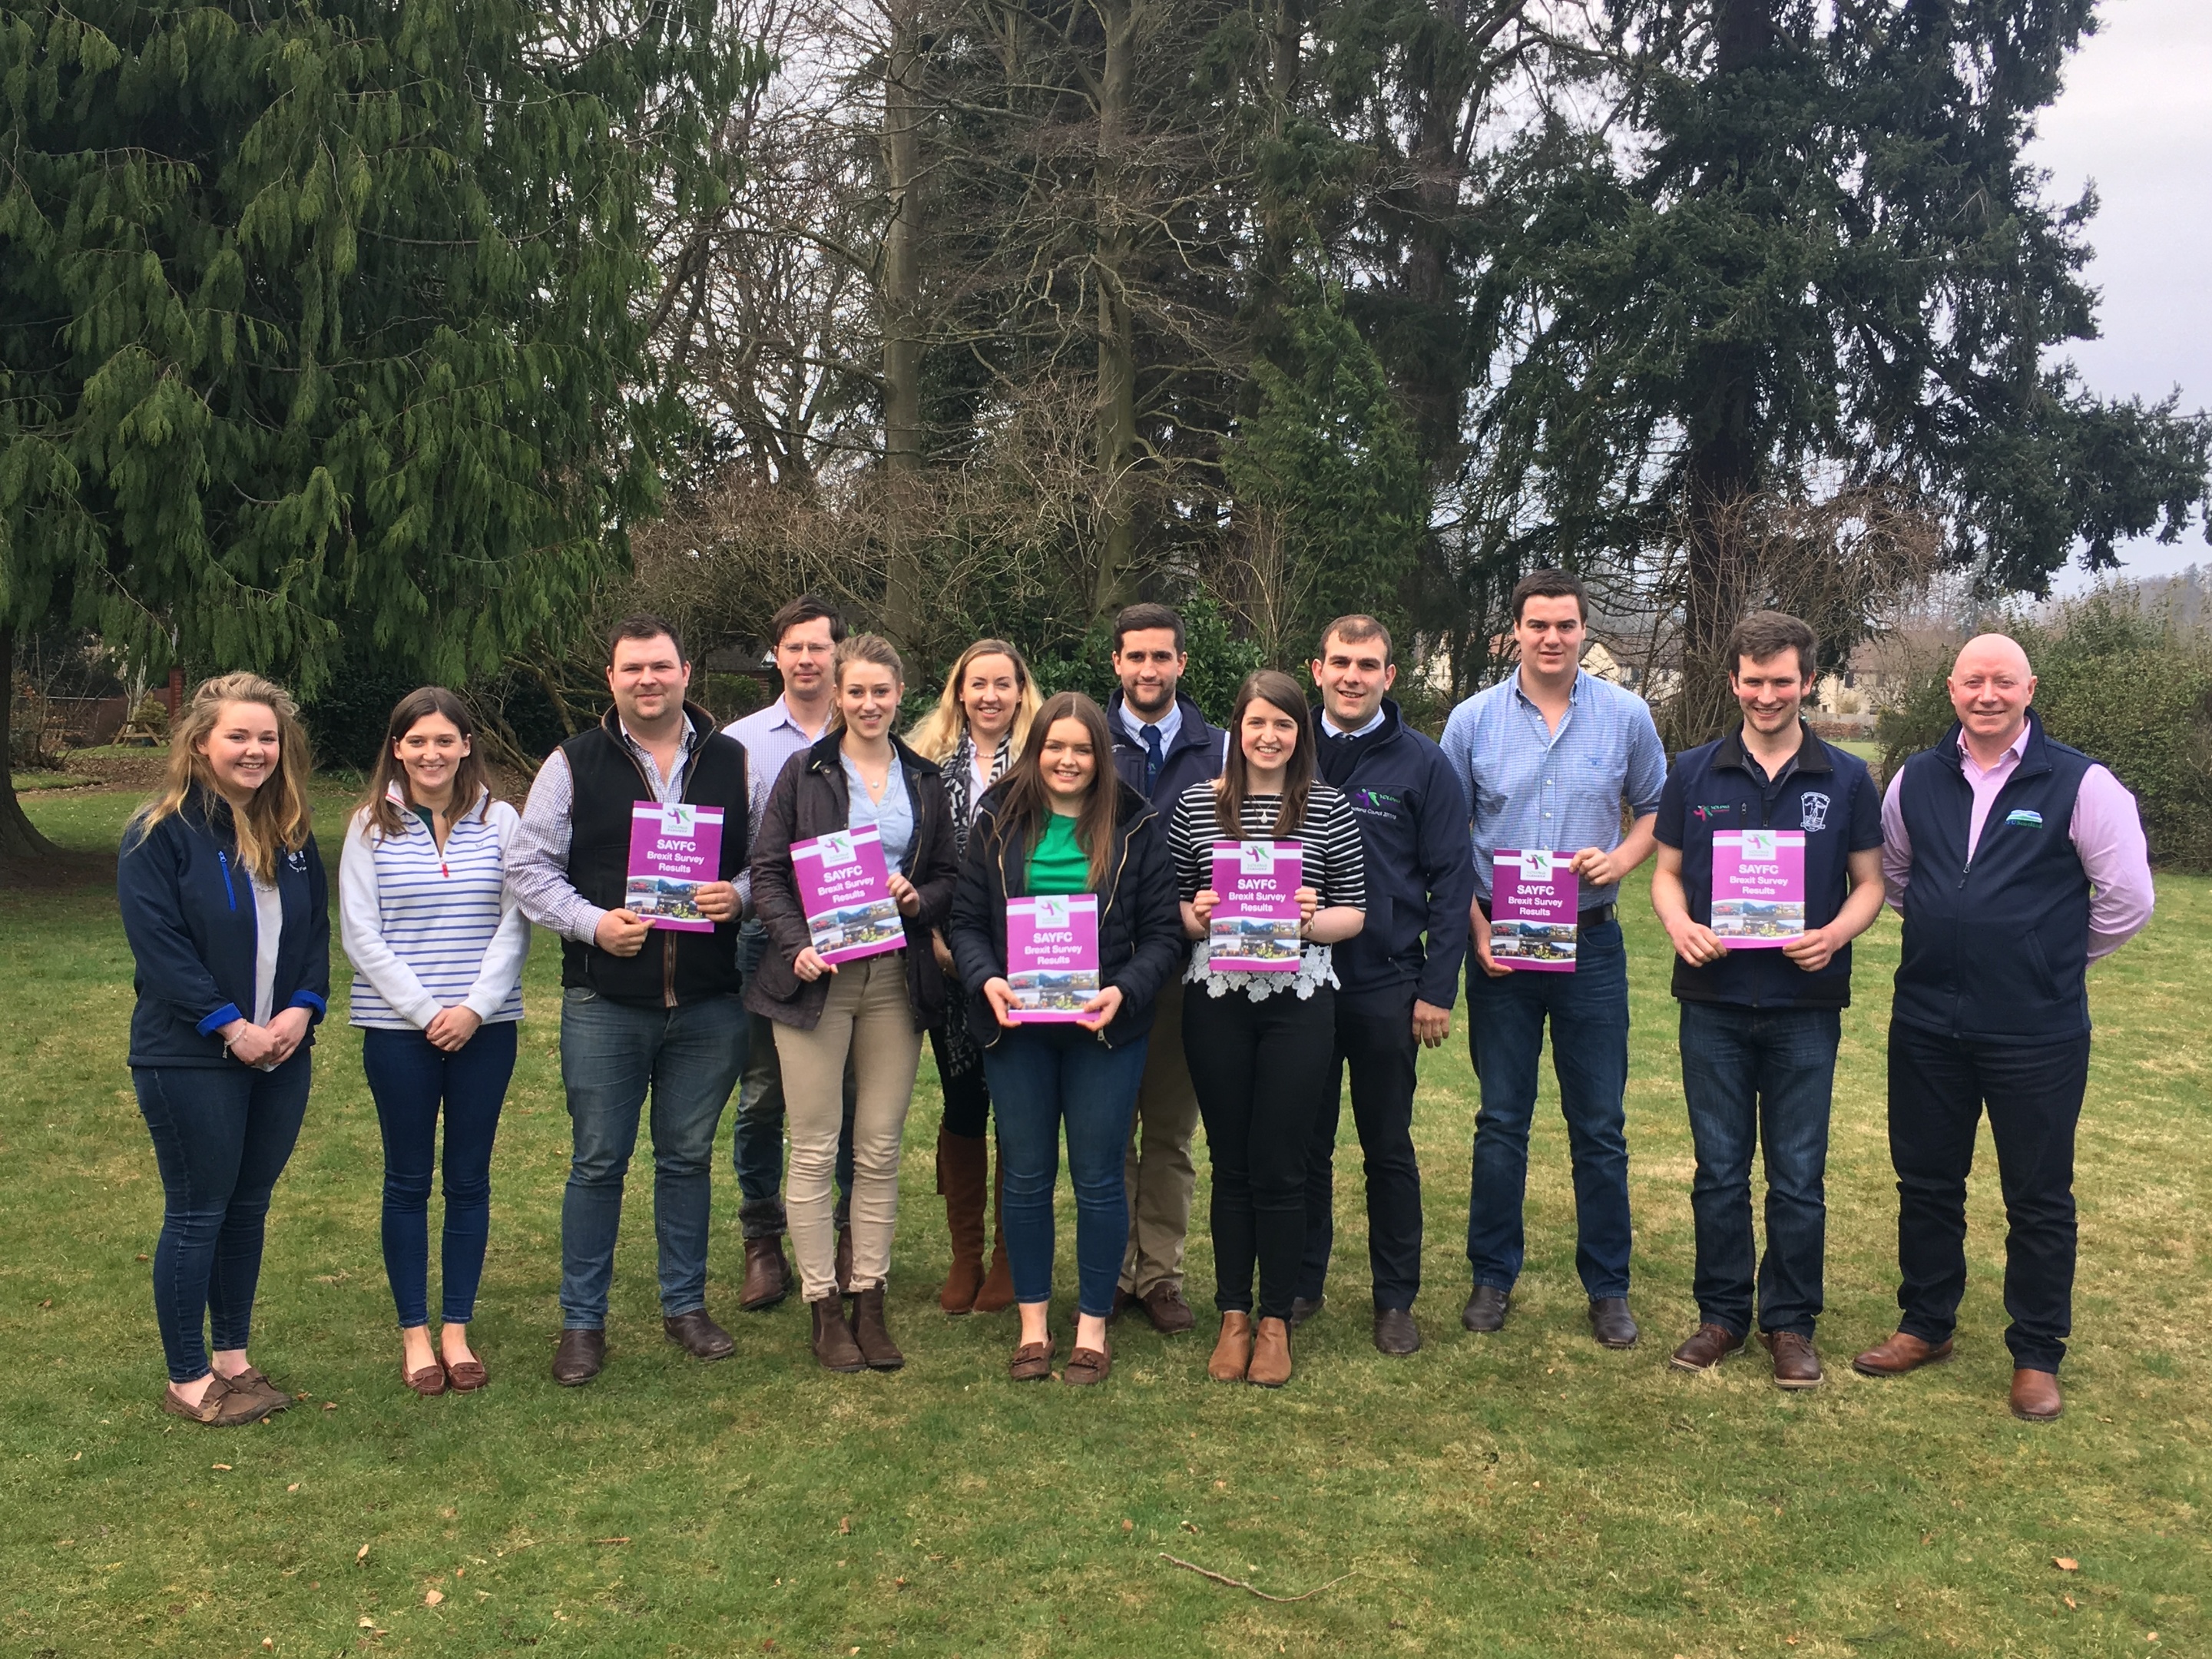 Members of the young farmers agri and rural affairs committee with their Brexit report